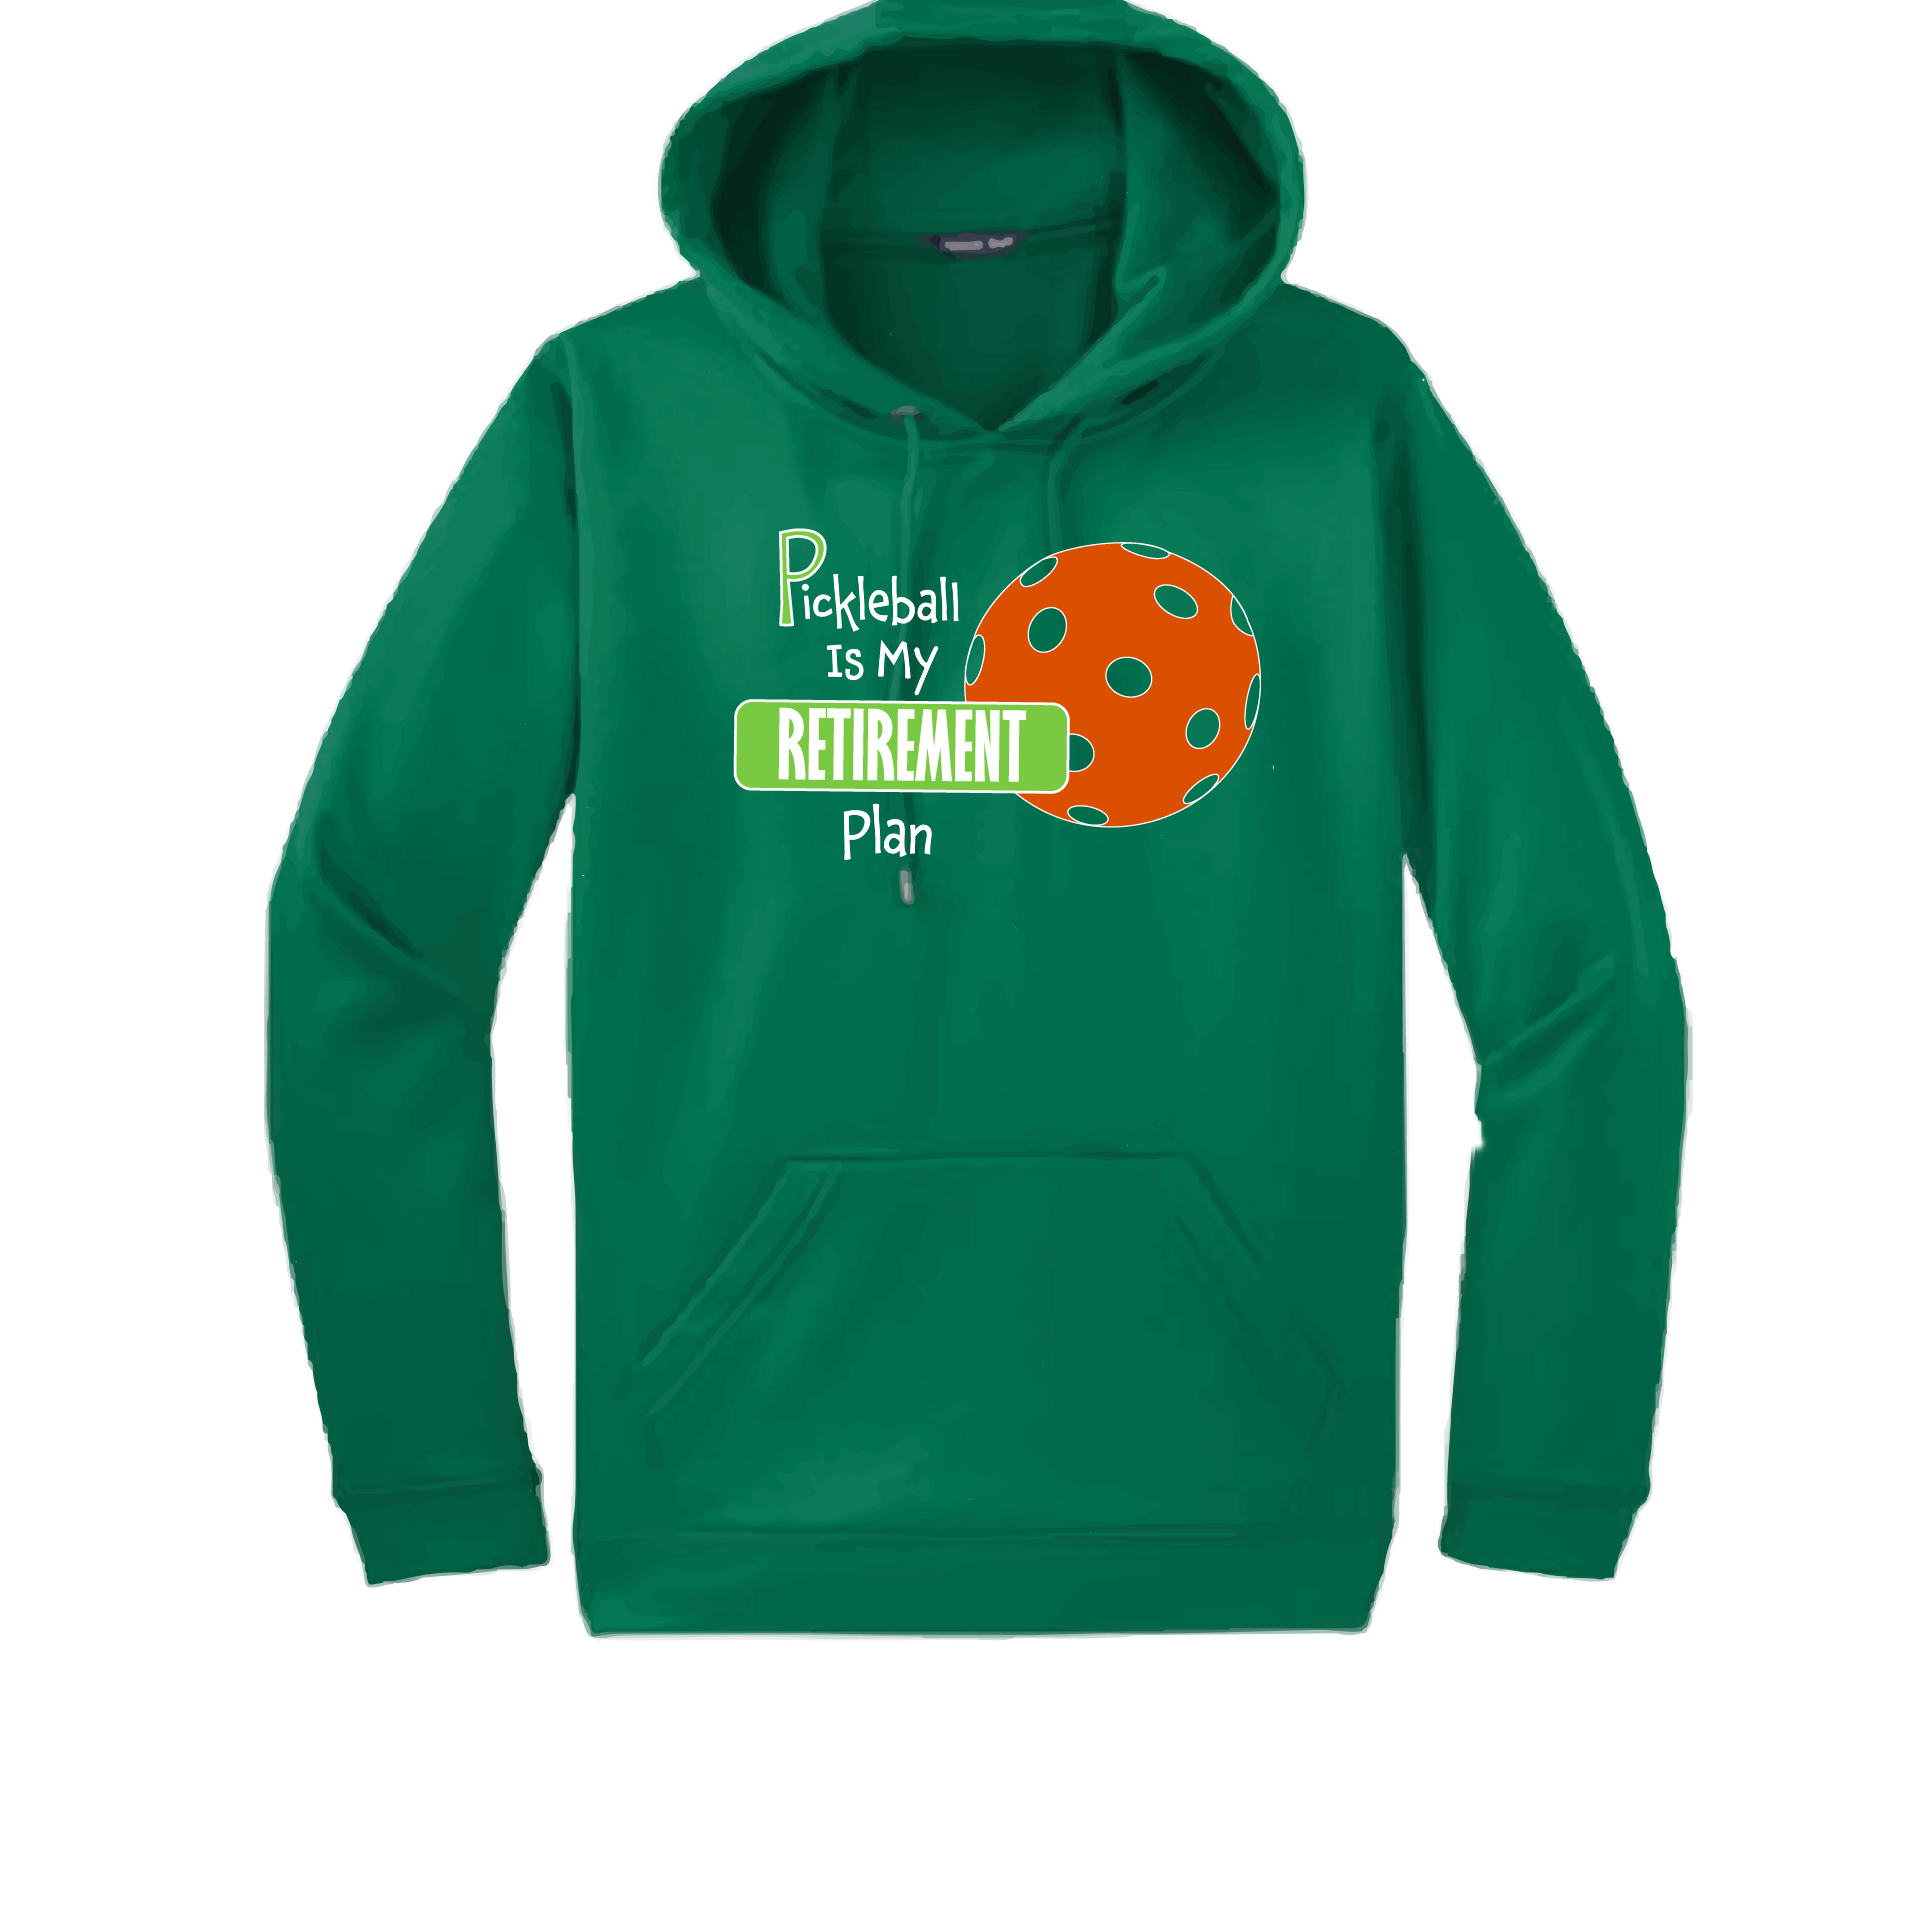 Pickleball Design: Pickleball is my Retirement Plan  Unisex Hooded Sweatshirt: Moisture-wicking, double-lined hood, front pouch pocket.  This unisex hooded sweatshirt is ultra comfortable and soft. Stay warm on the Pickleball courts while being that hit with this one of kind design.